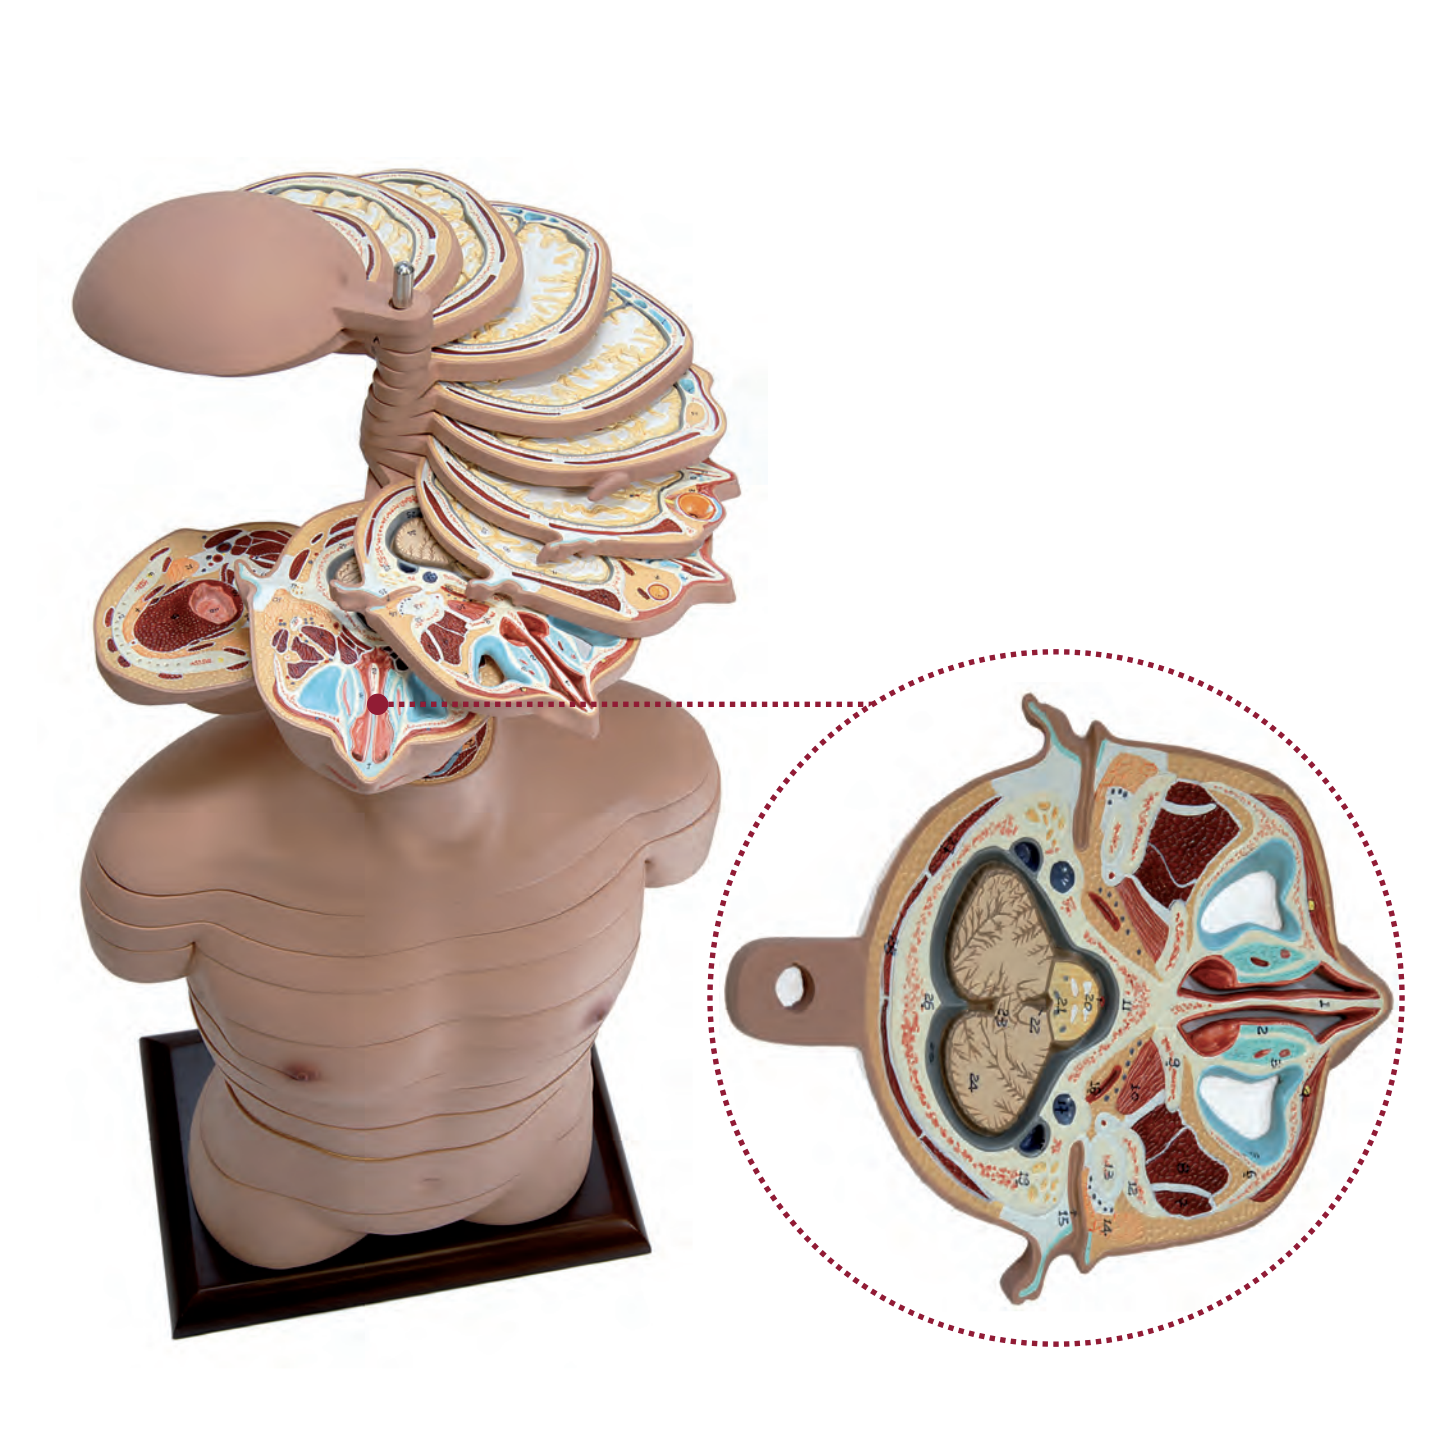 Advanced and flexible MRI torso with 24 cut surfaces presented on stands